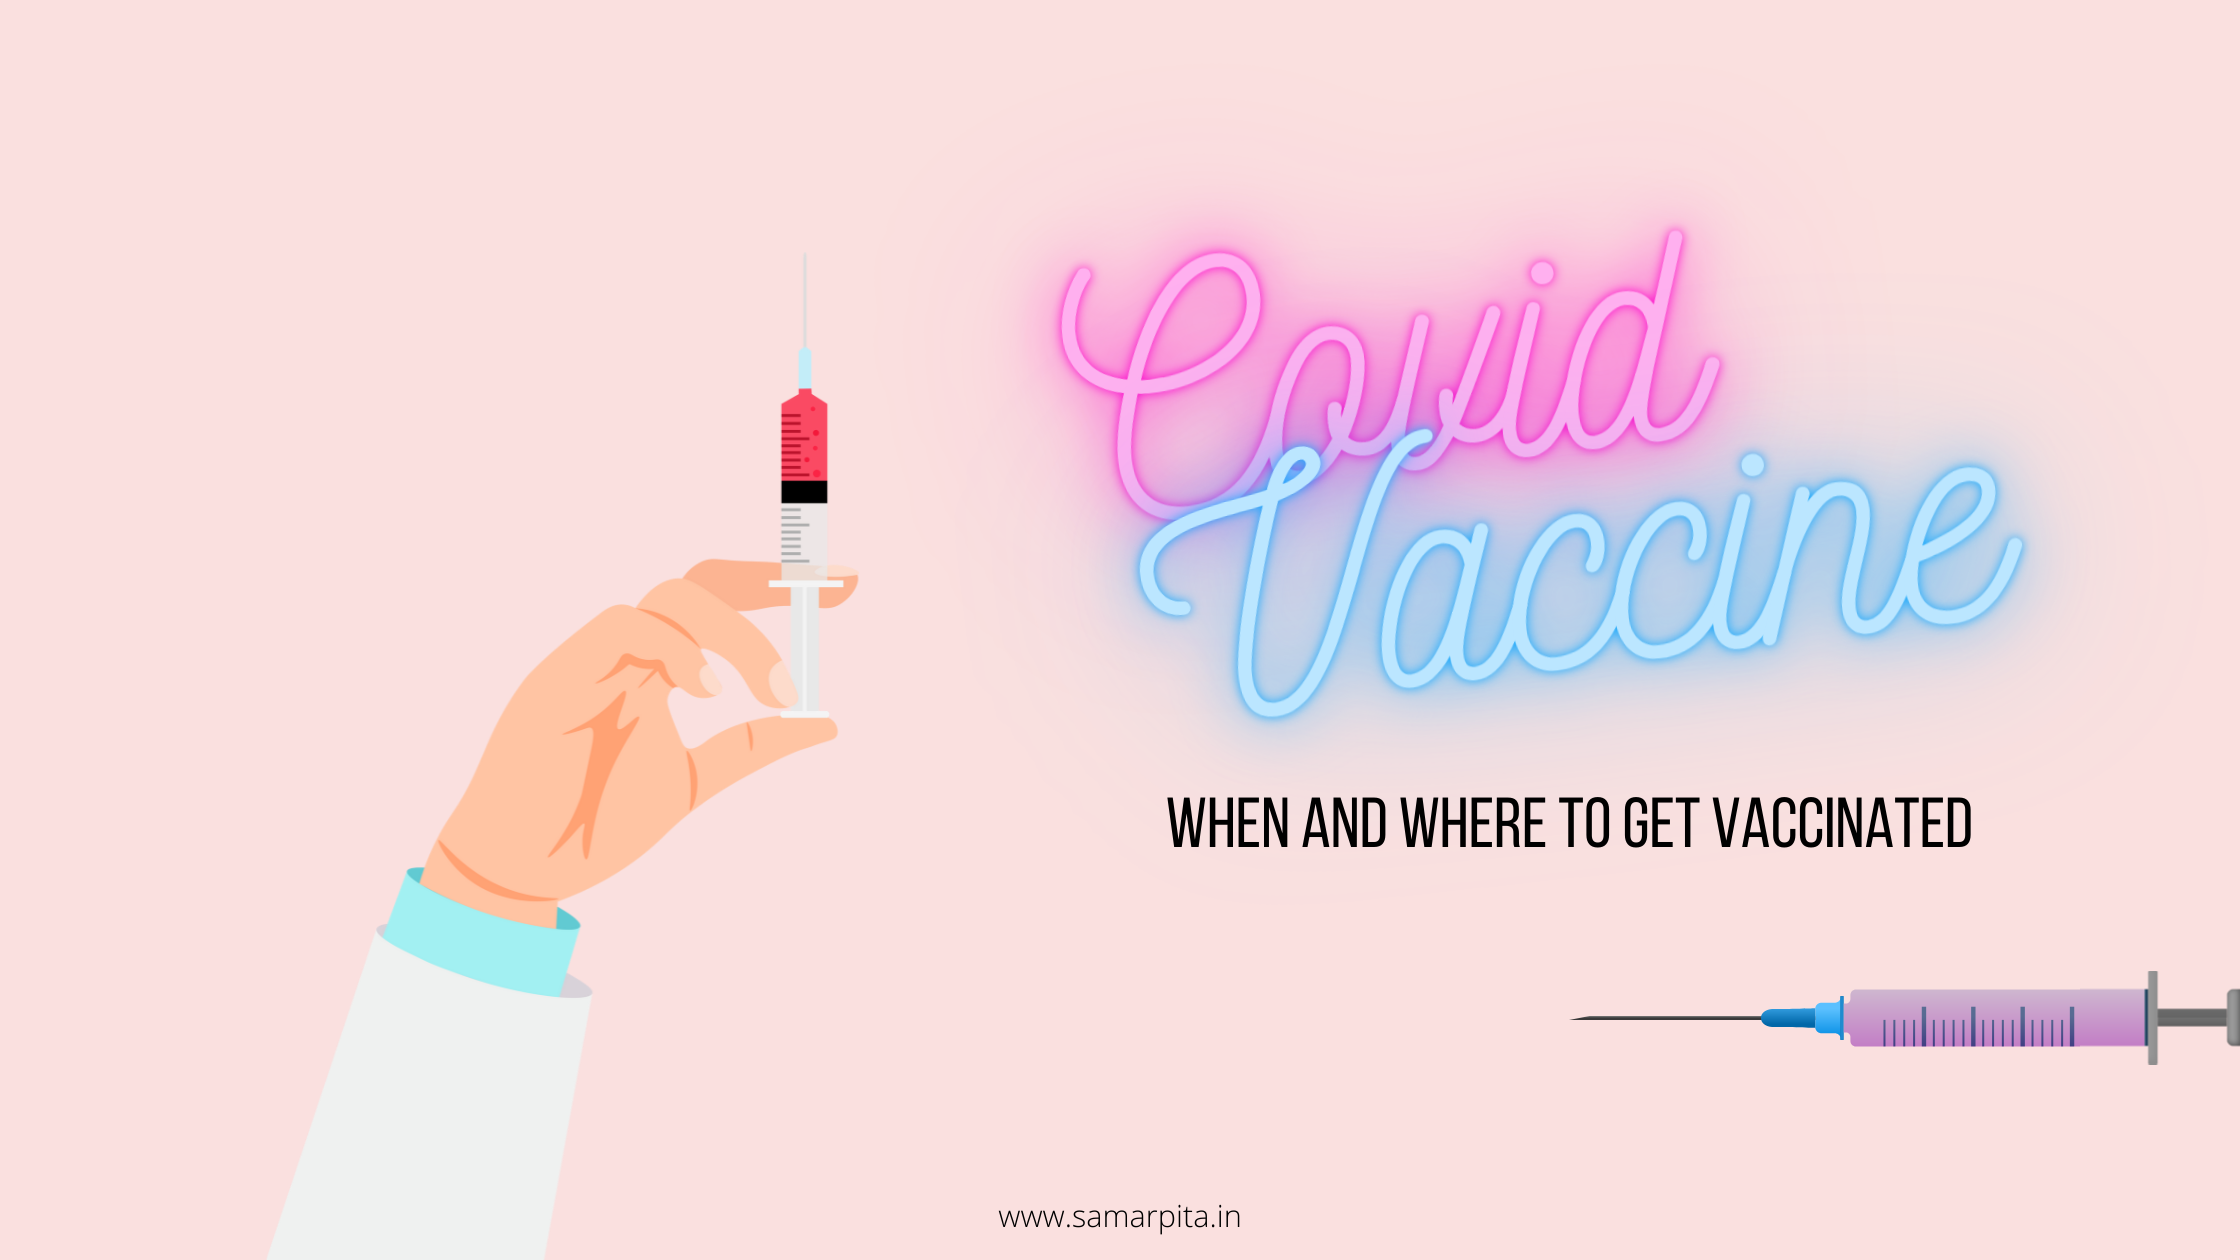 Covid Vaccine: When And Where To Get Vaccinated